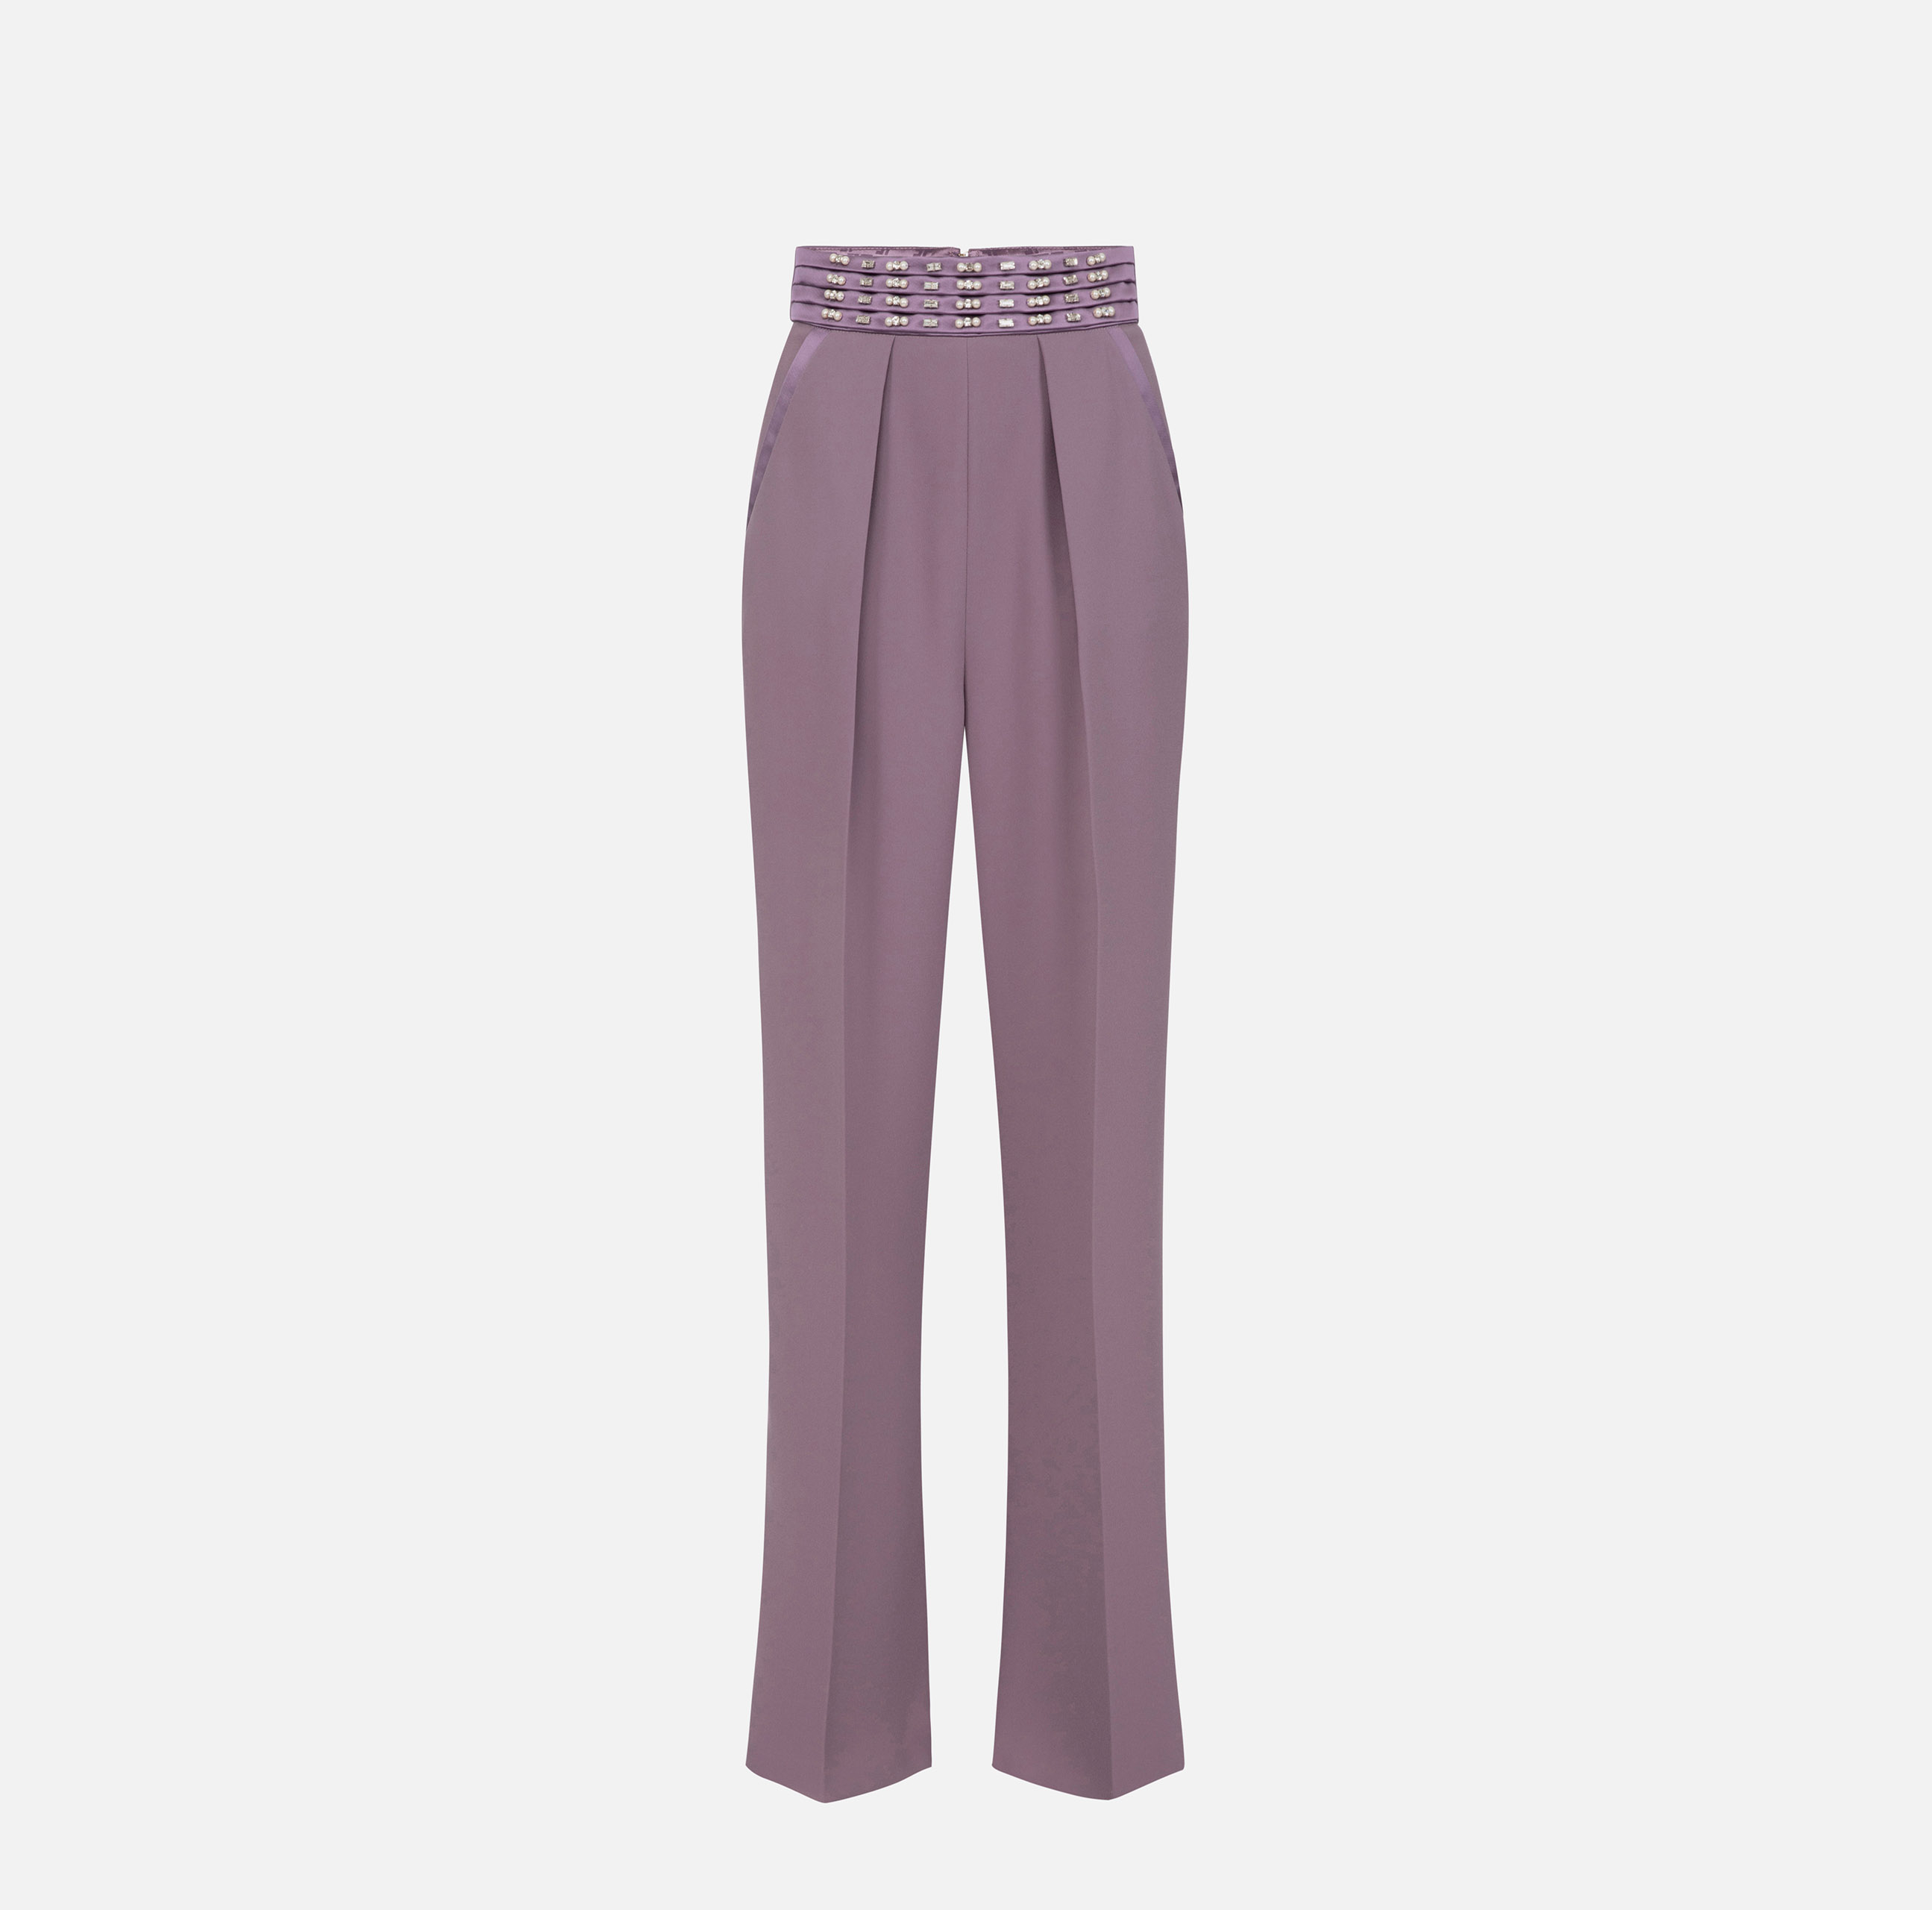 Palazzo trousers in crêpe fabric with embroidered band - ABBIGLIAMENTO - Elisabetta Franchi